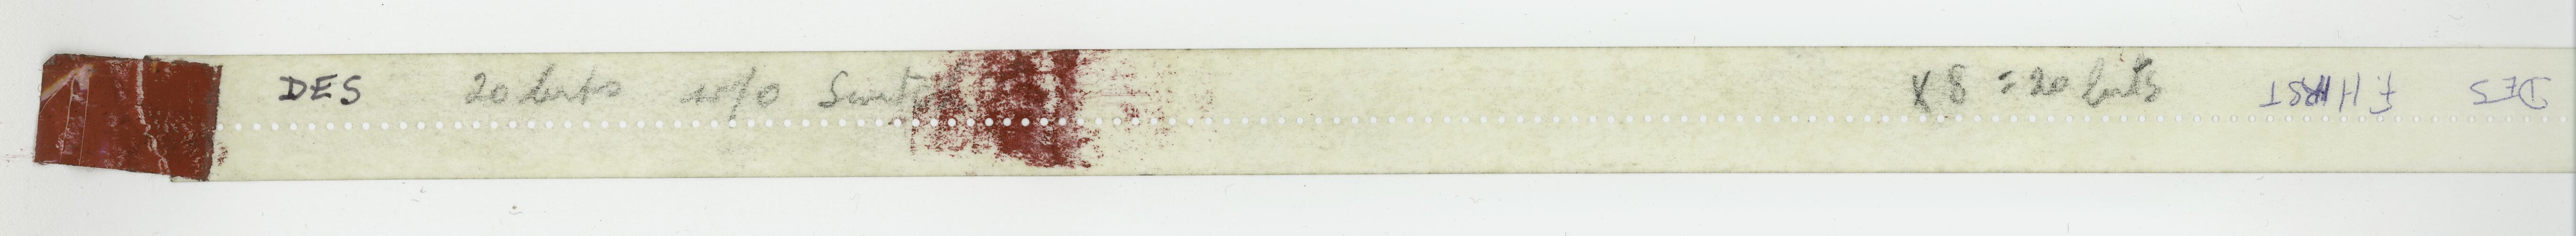 Length of paper tape, text and red marks.